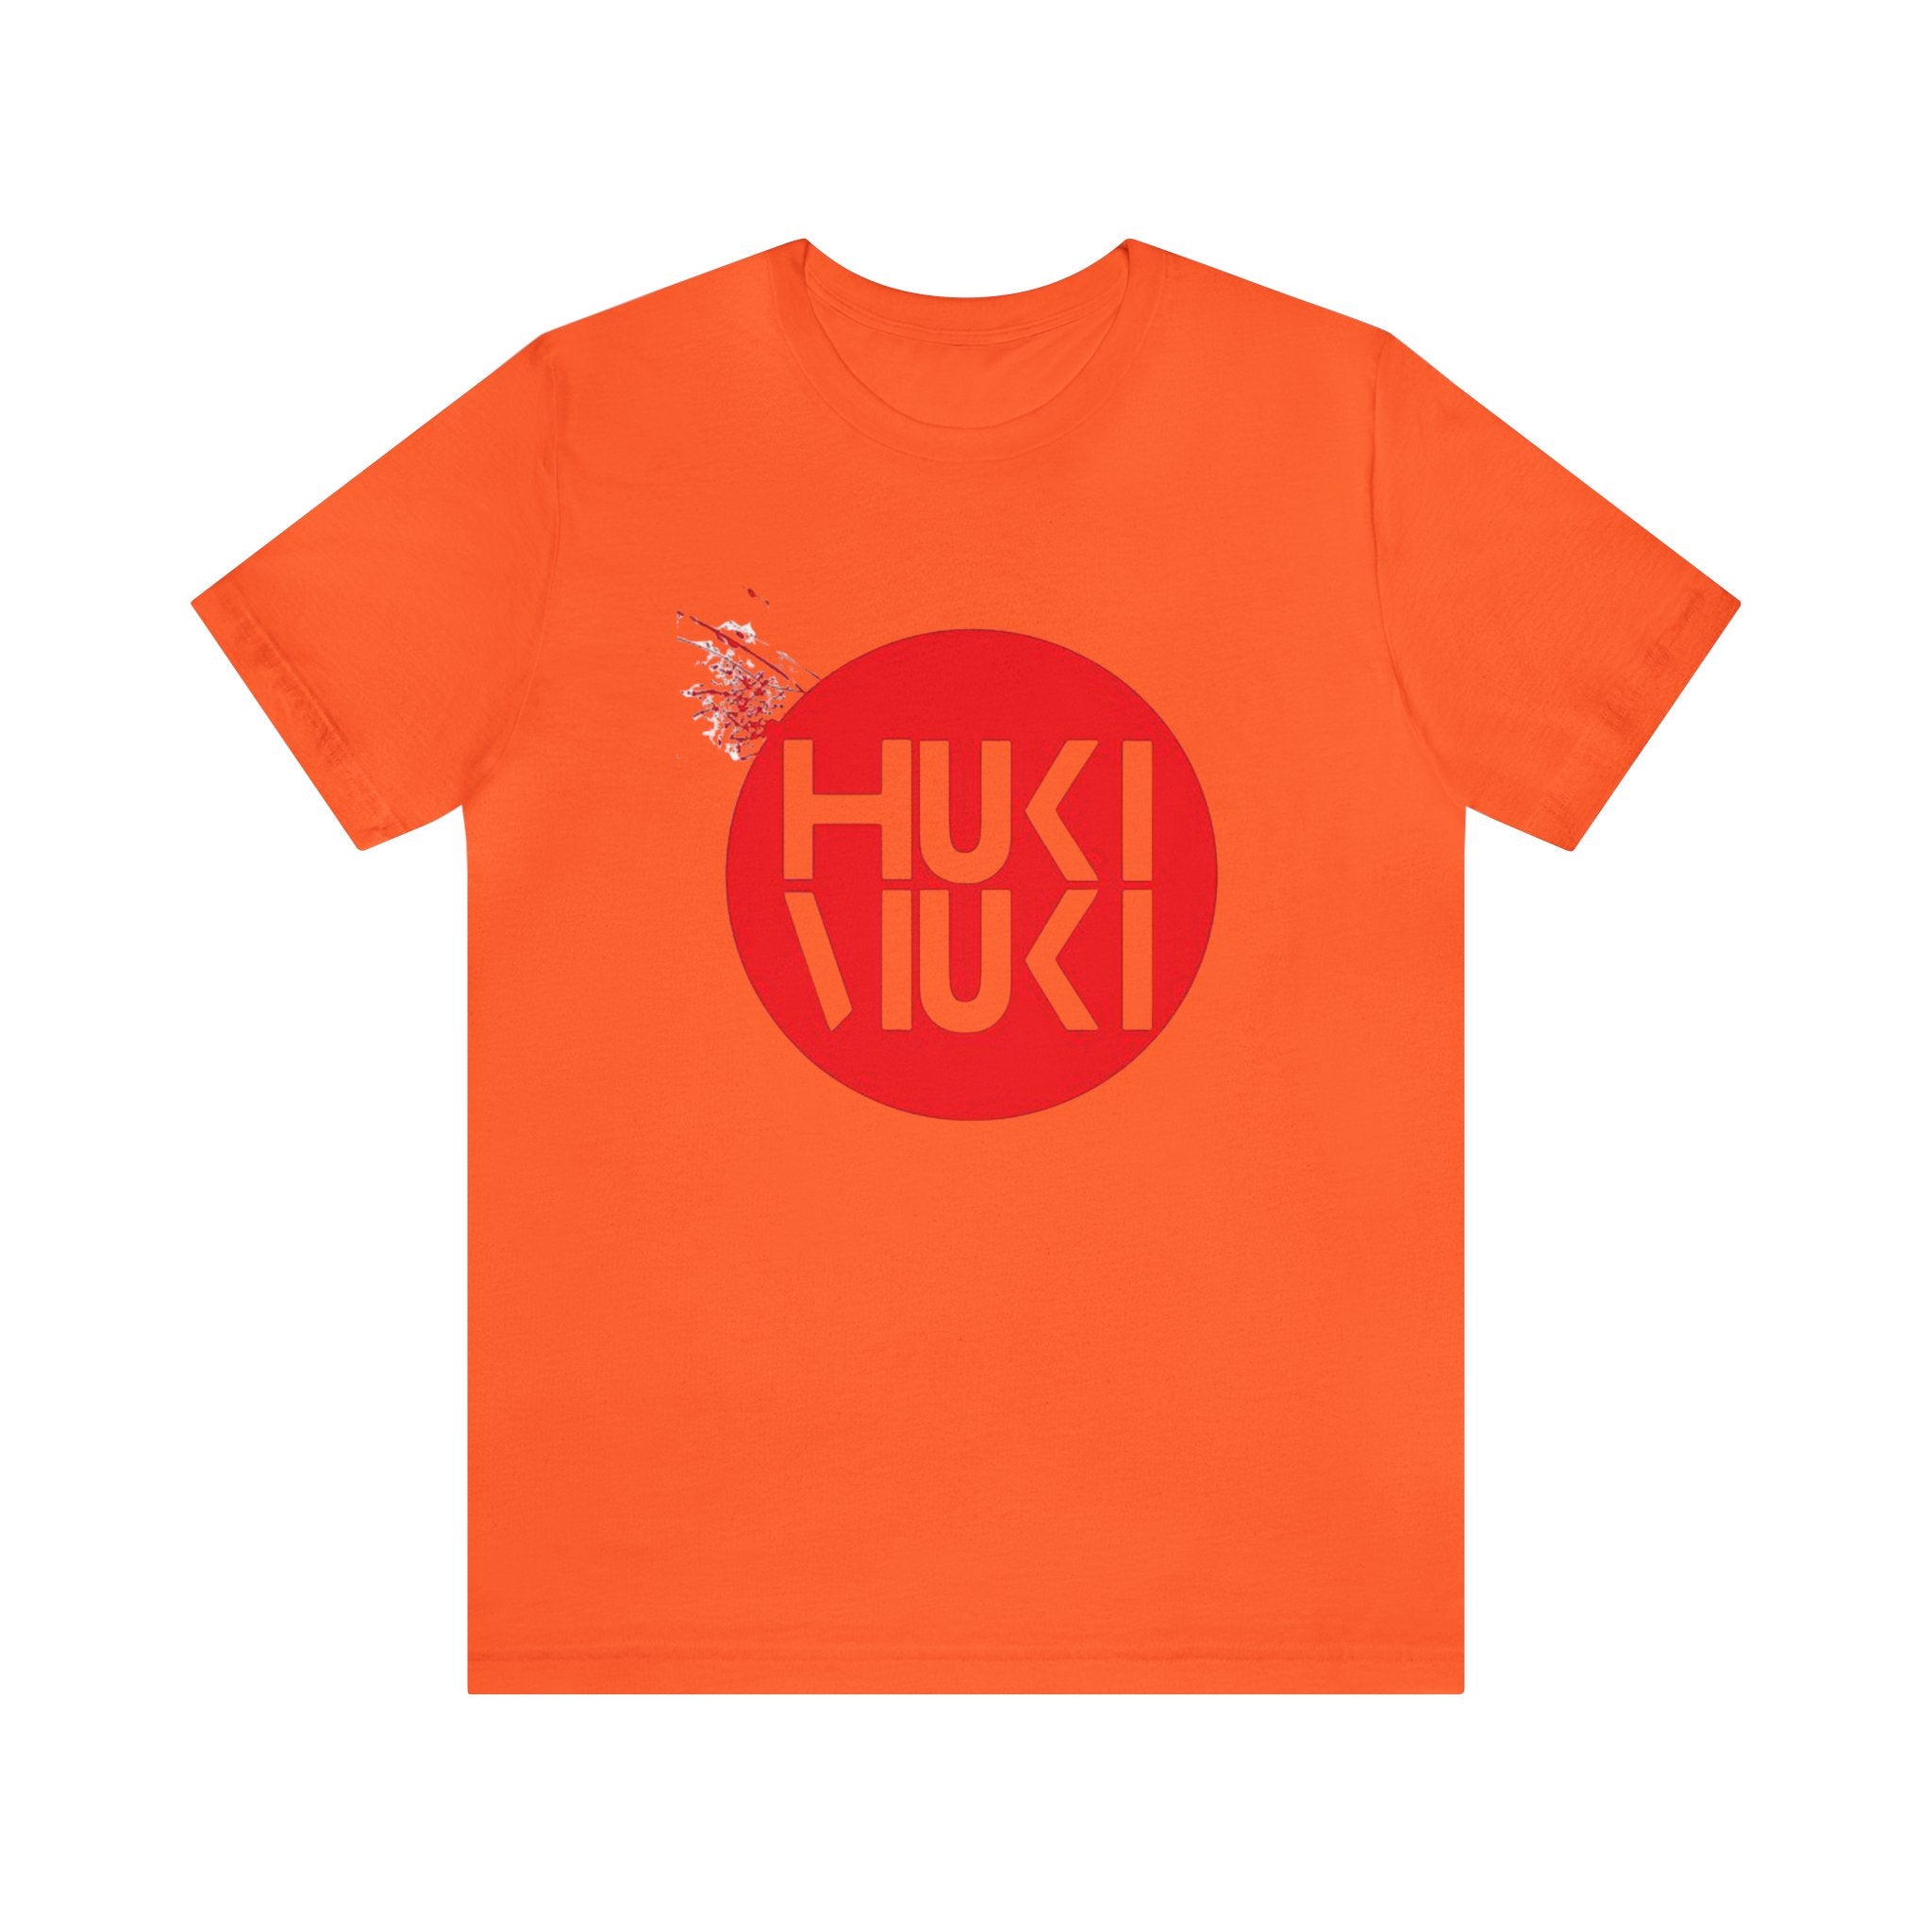 https://creationsbychrisandcarlos.store/products/absolutely-fabulous-huki-muci-unisex-jersey-short-sleeve-tee